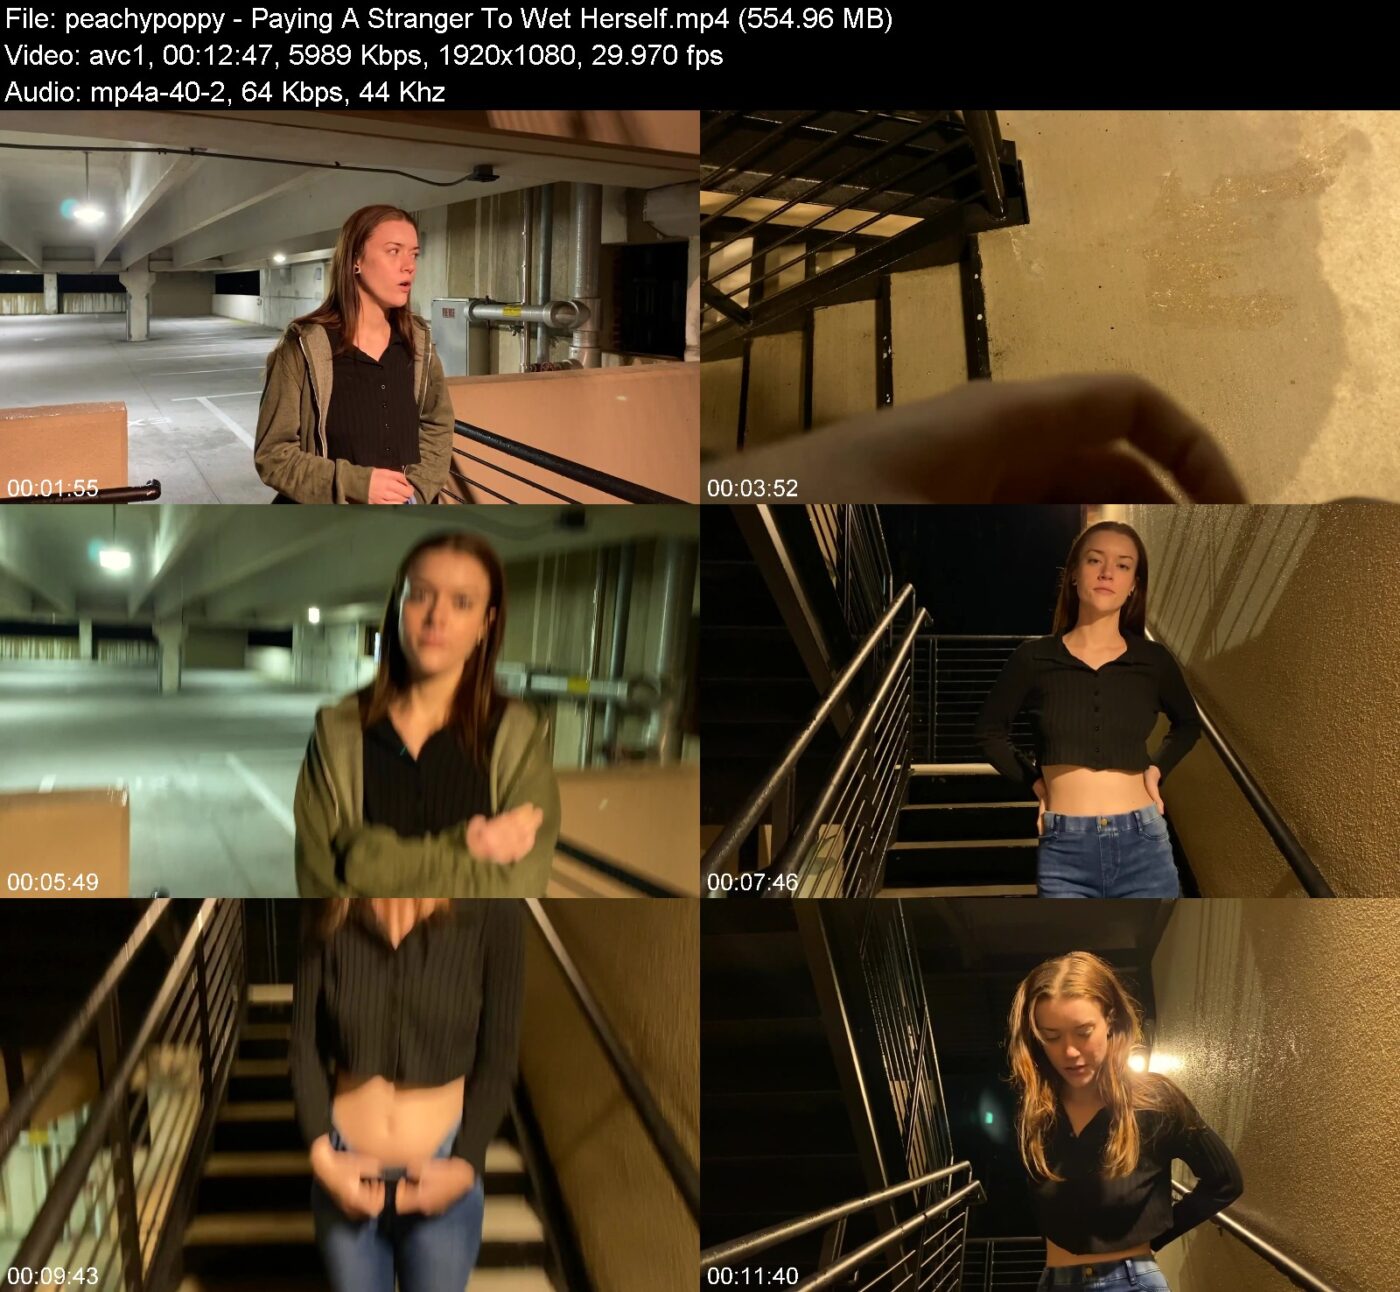 Actress: peachypoppy. Title and Studio: Paying A Stranger To Wet Herself